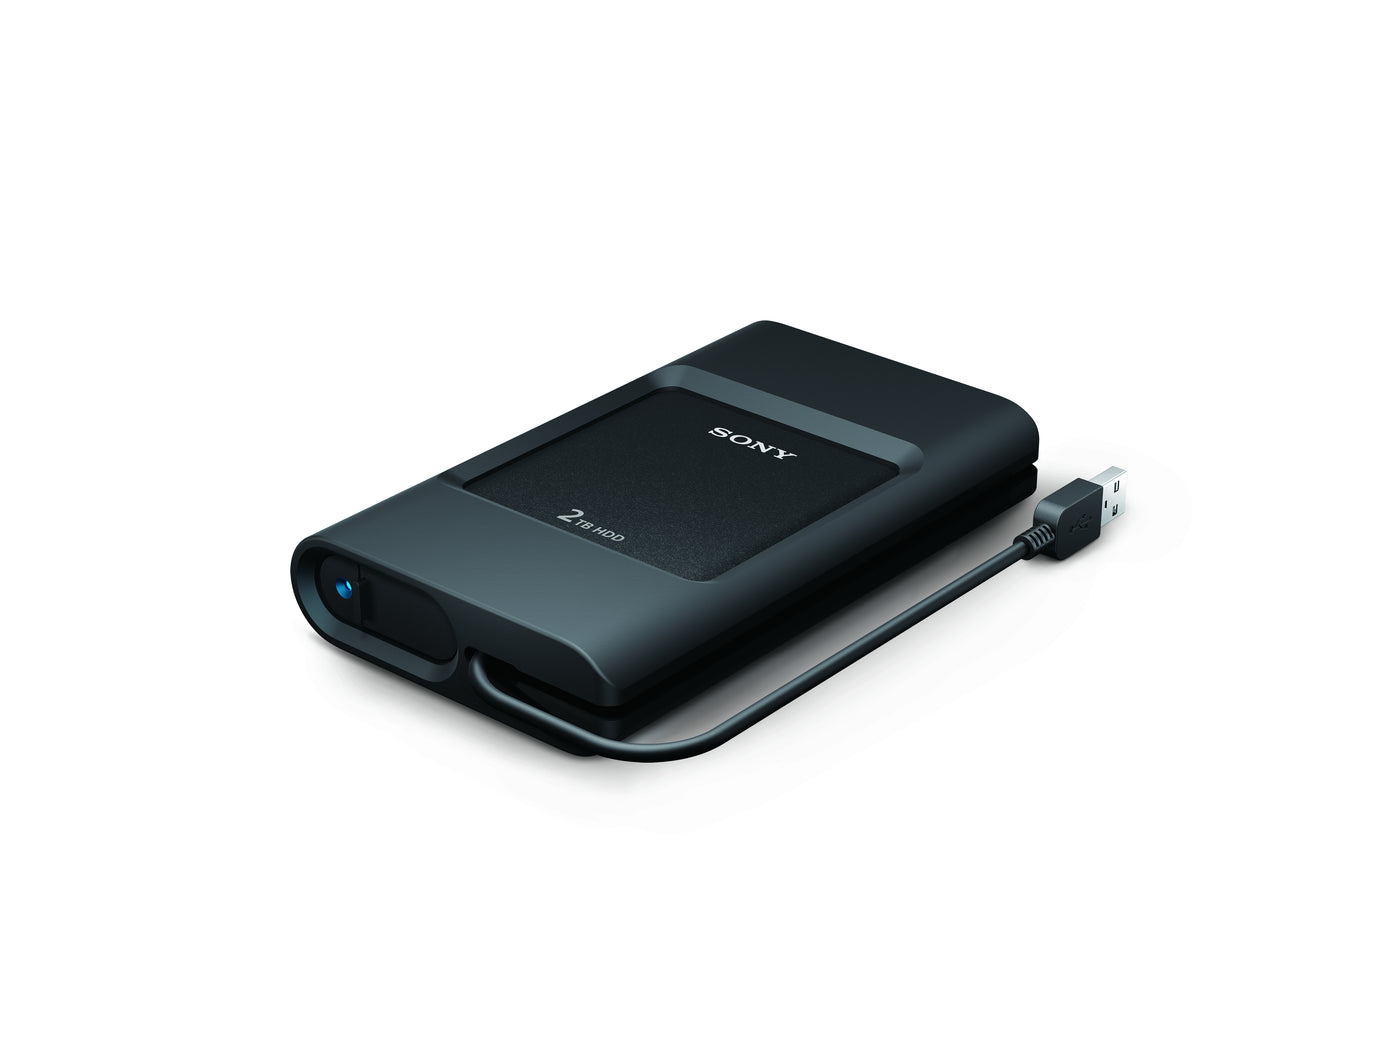 SONY Ruggedized Portable External Drive with USB 3.0 and USB-C